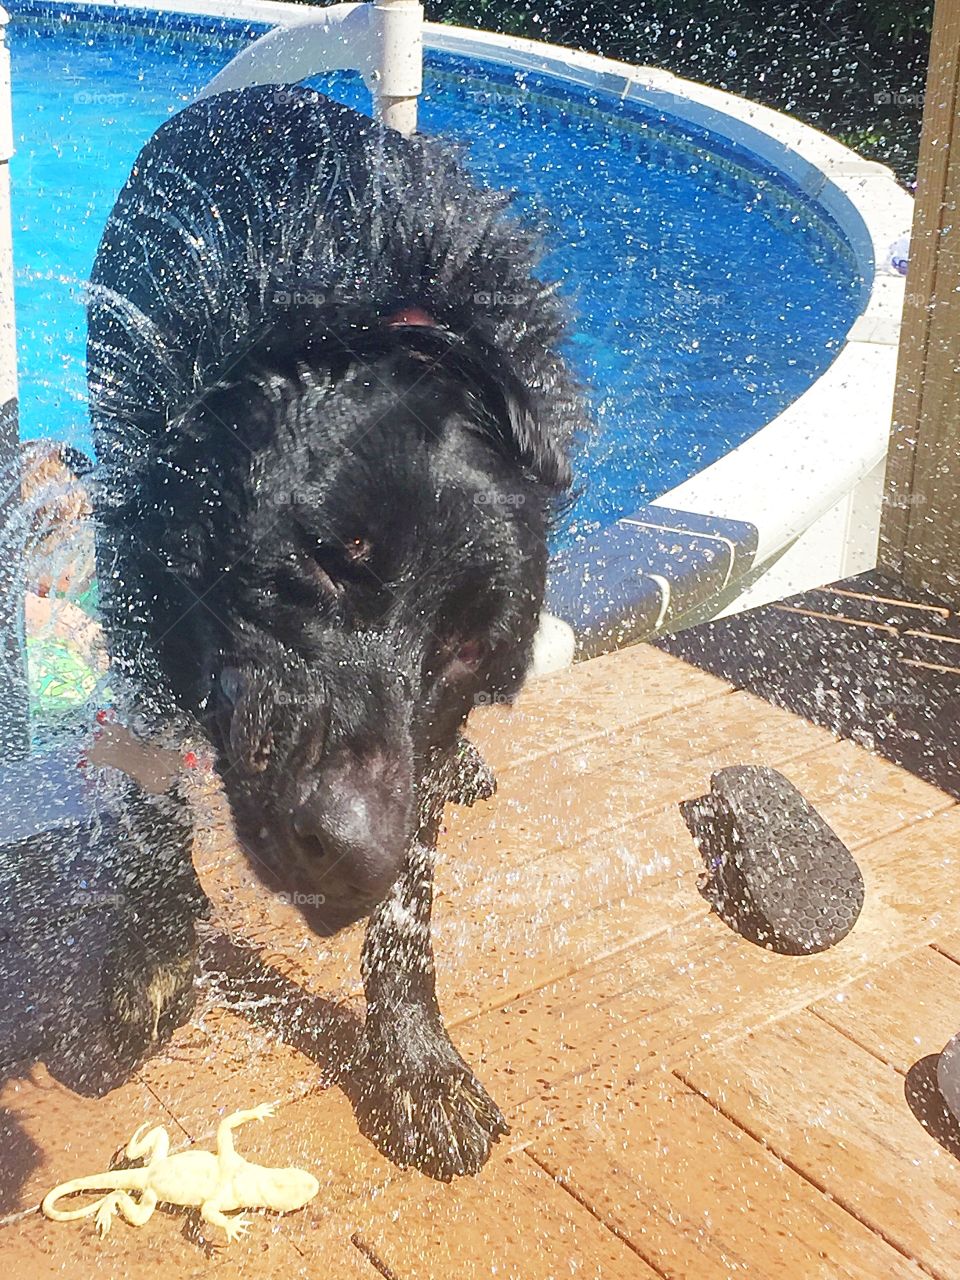 Arrow, our German shepherd, shaking off after taking a dip in the pool. 